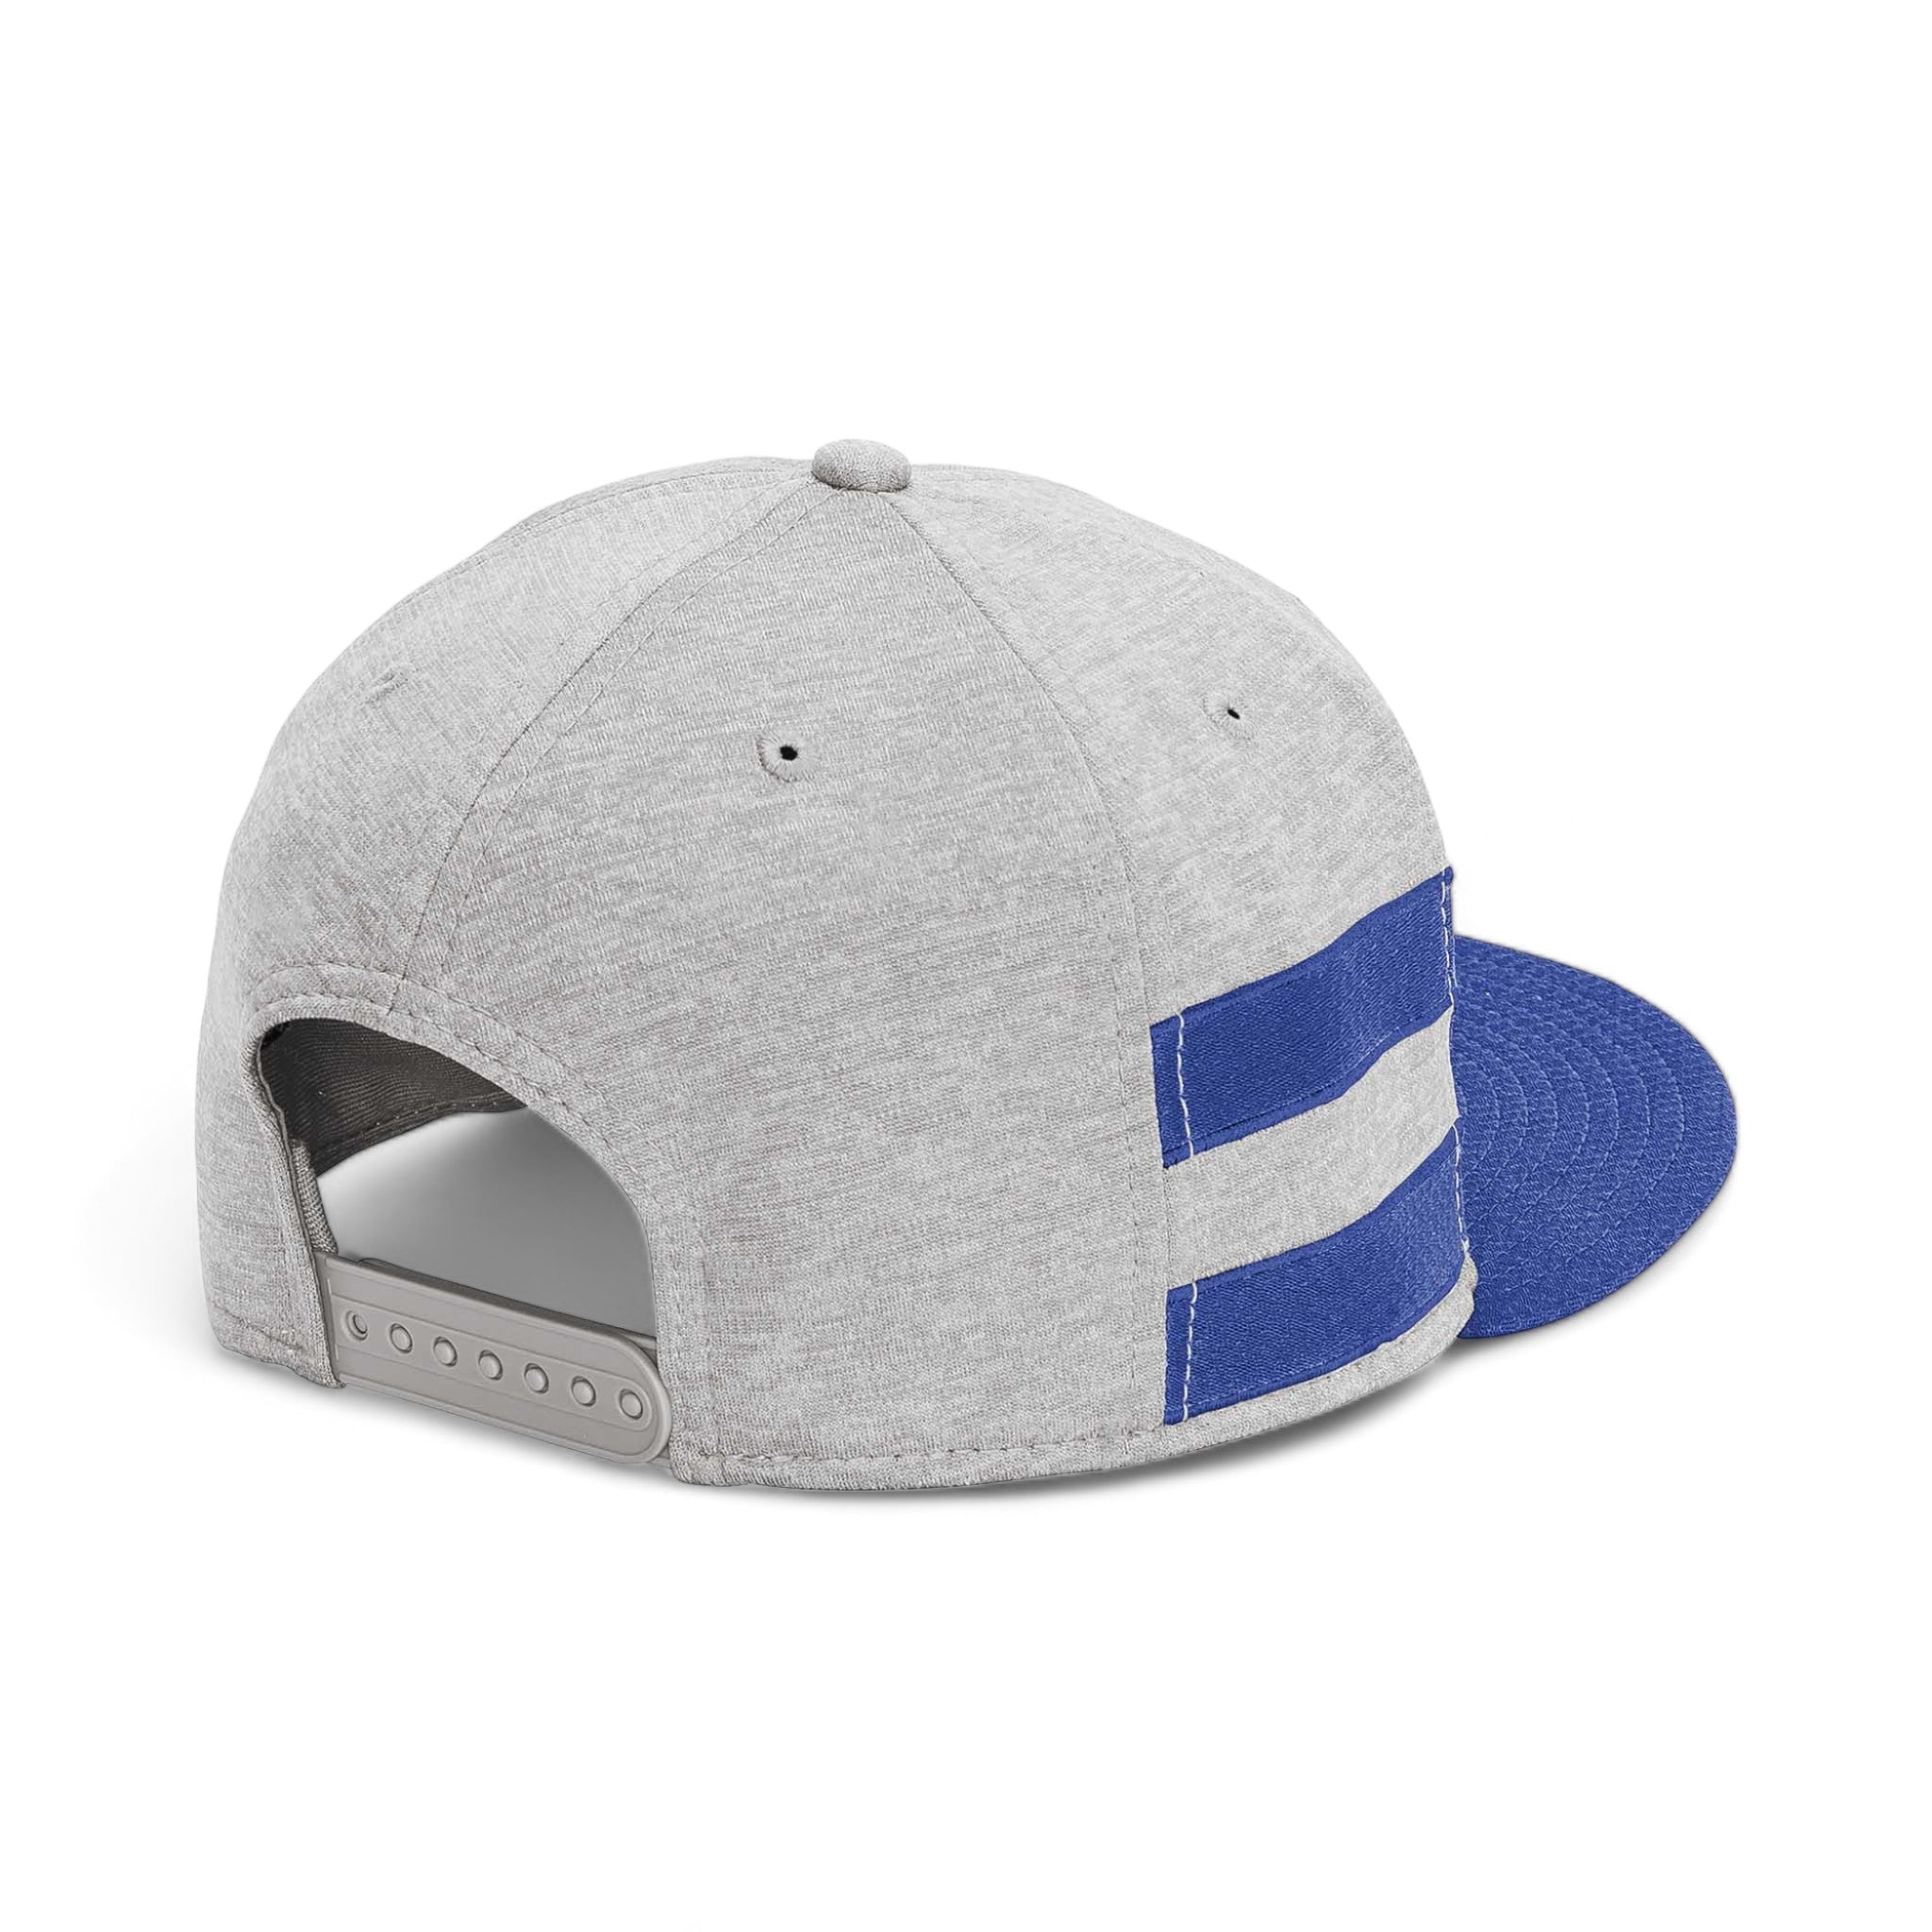 Back view of New Era NE408 custom hat in shadow heather and royal